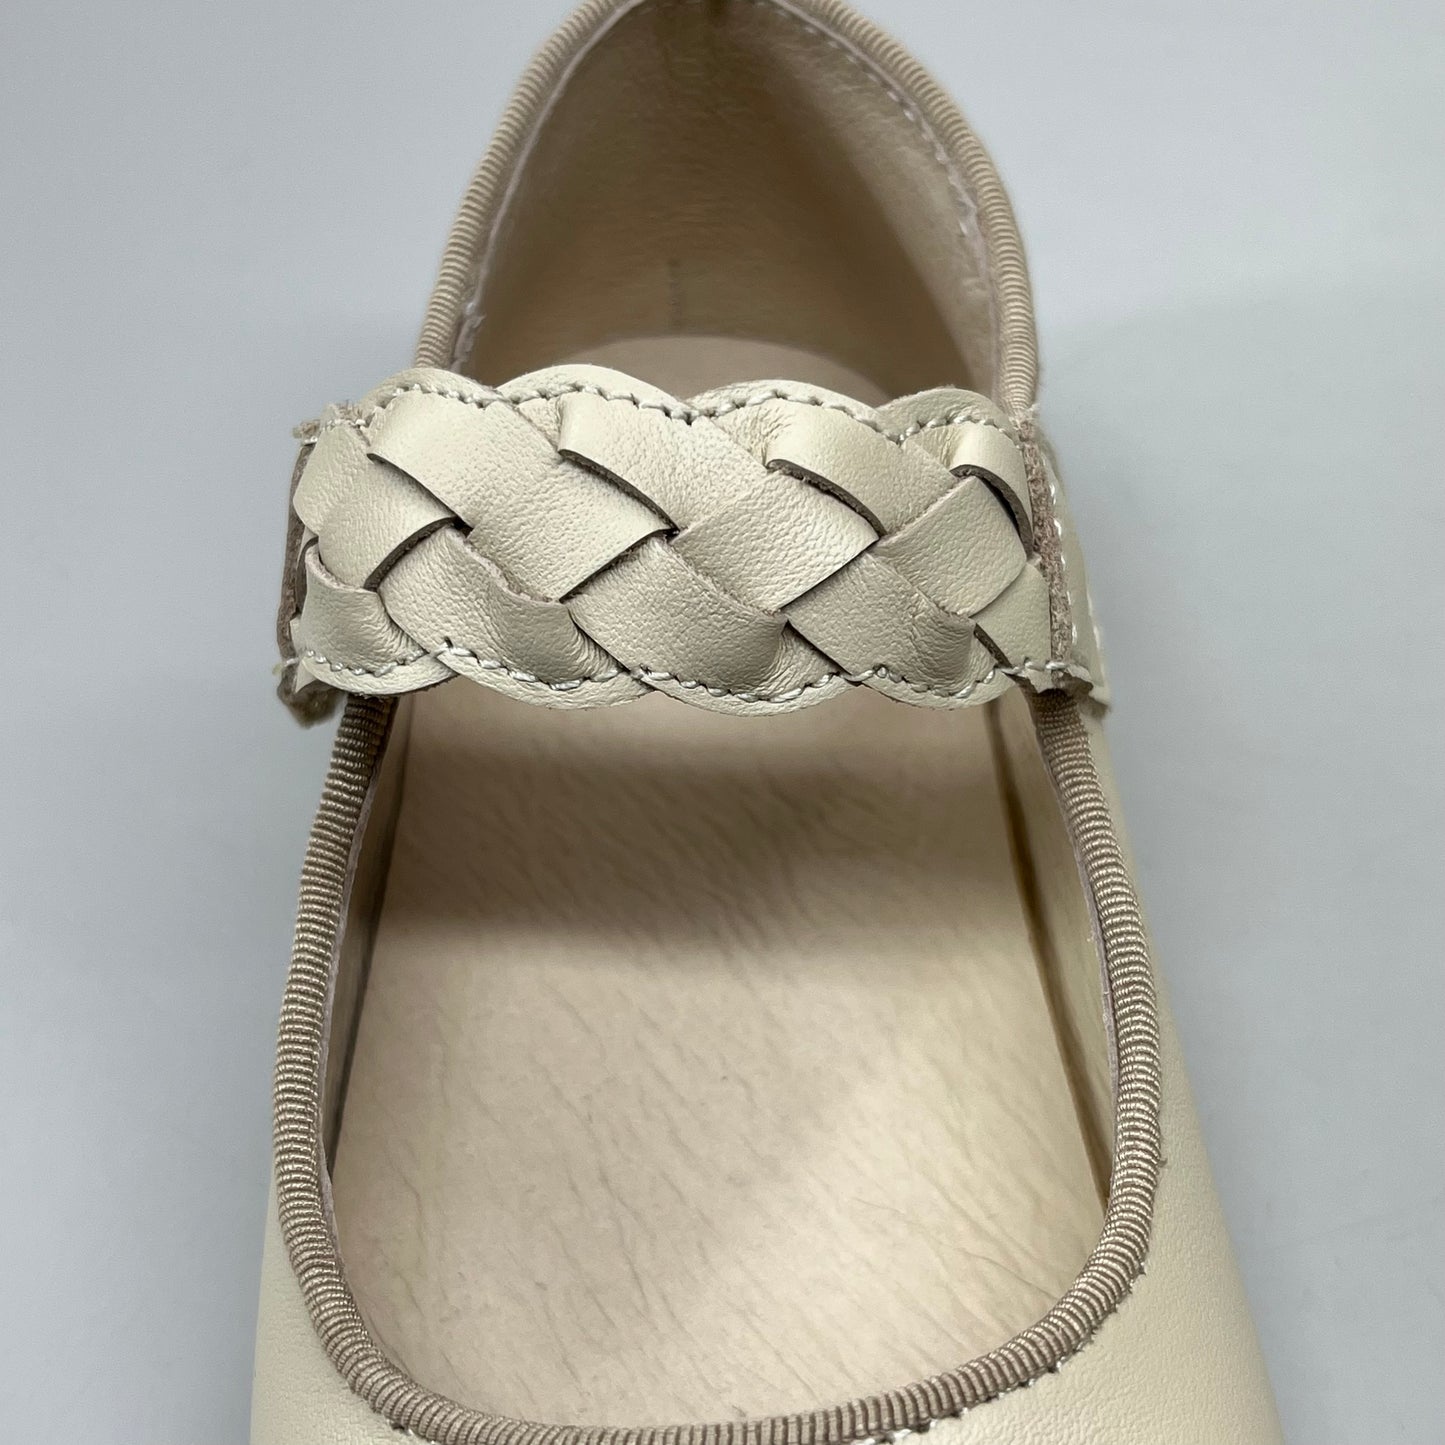 OLD SOLES Lady Plat Braided Strap Leather Shoe Kid’s Sz 28 US 11 Cream #817